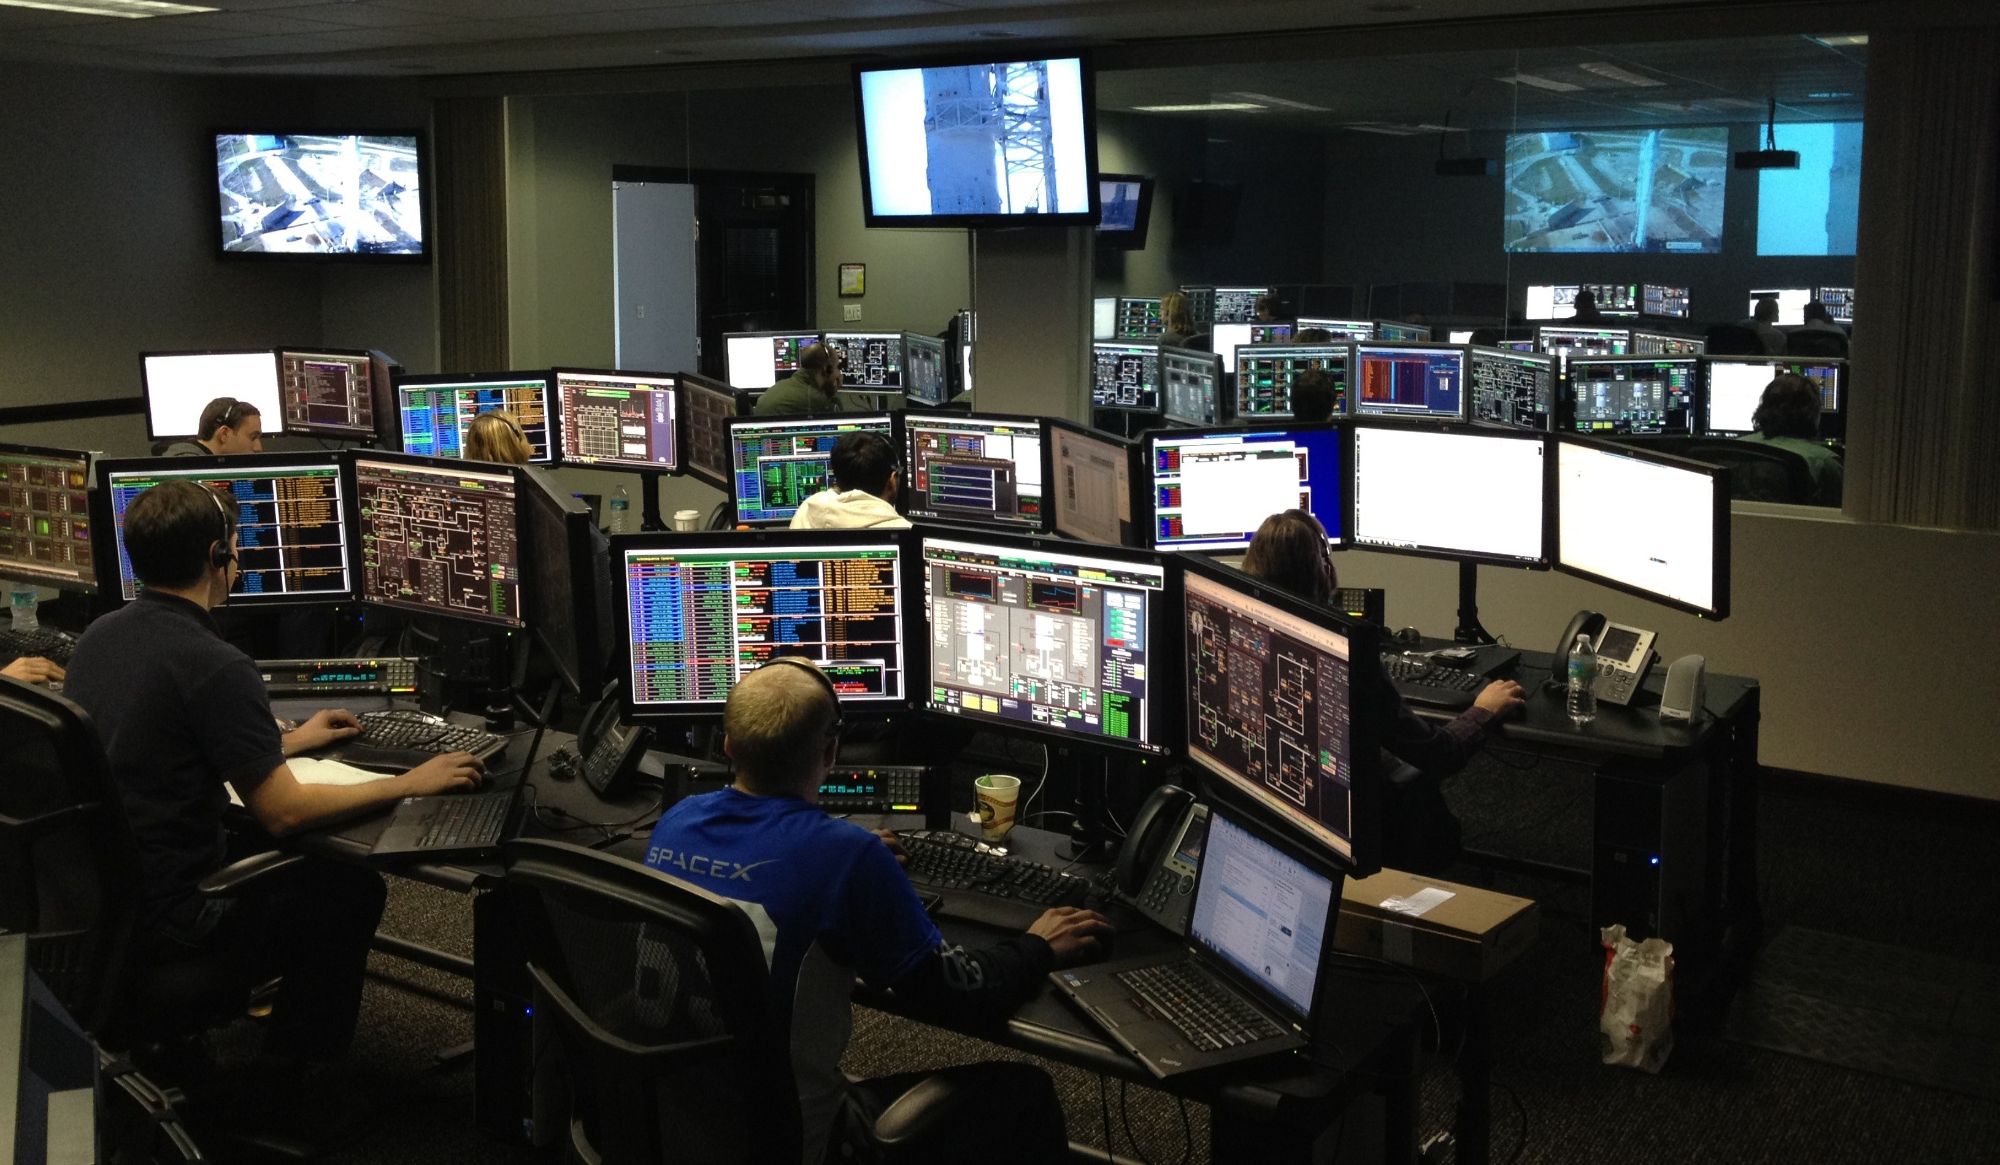 leadership is important in command scenarios as in this command control room